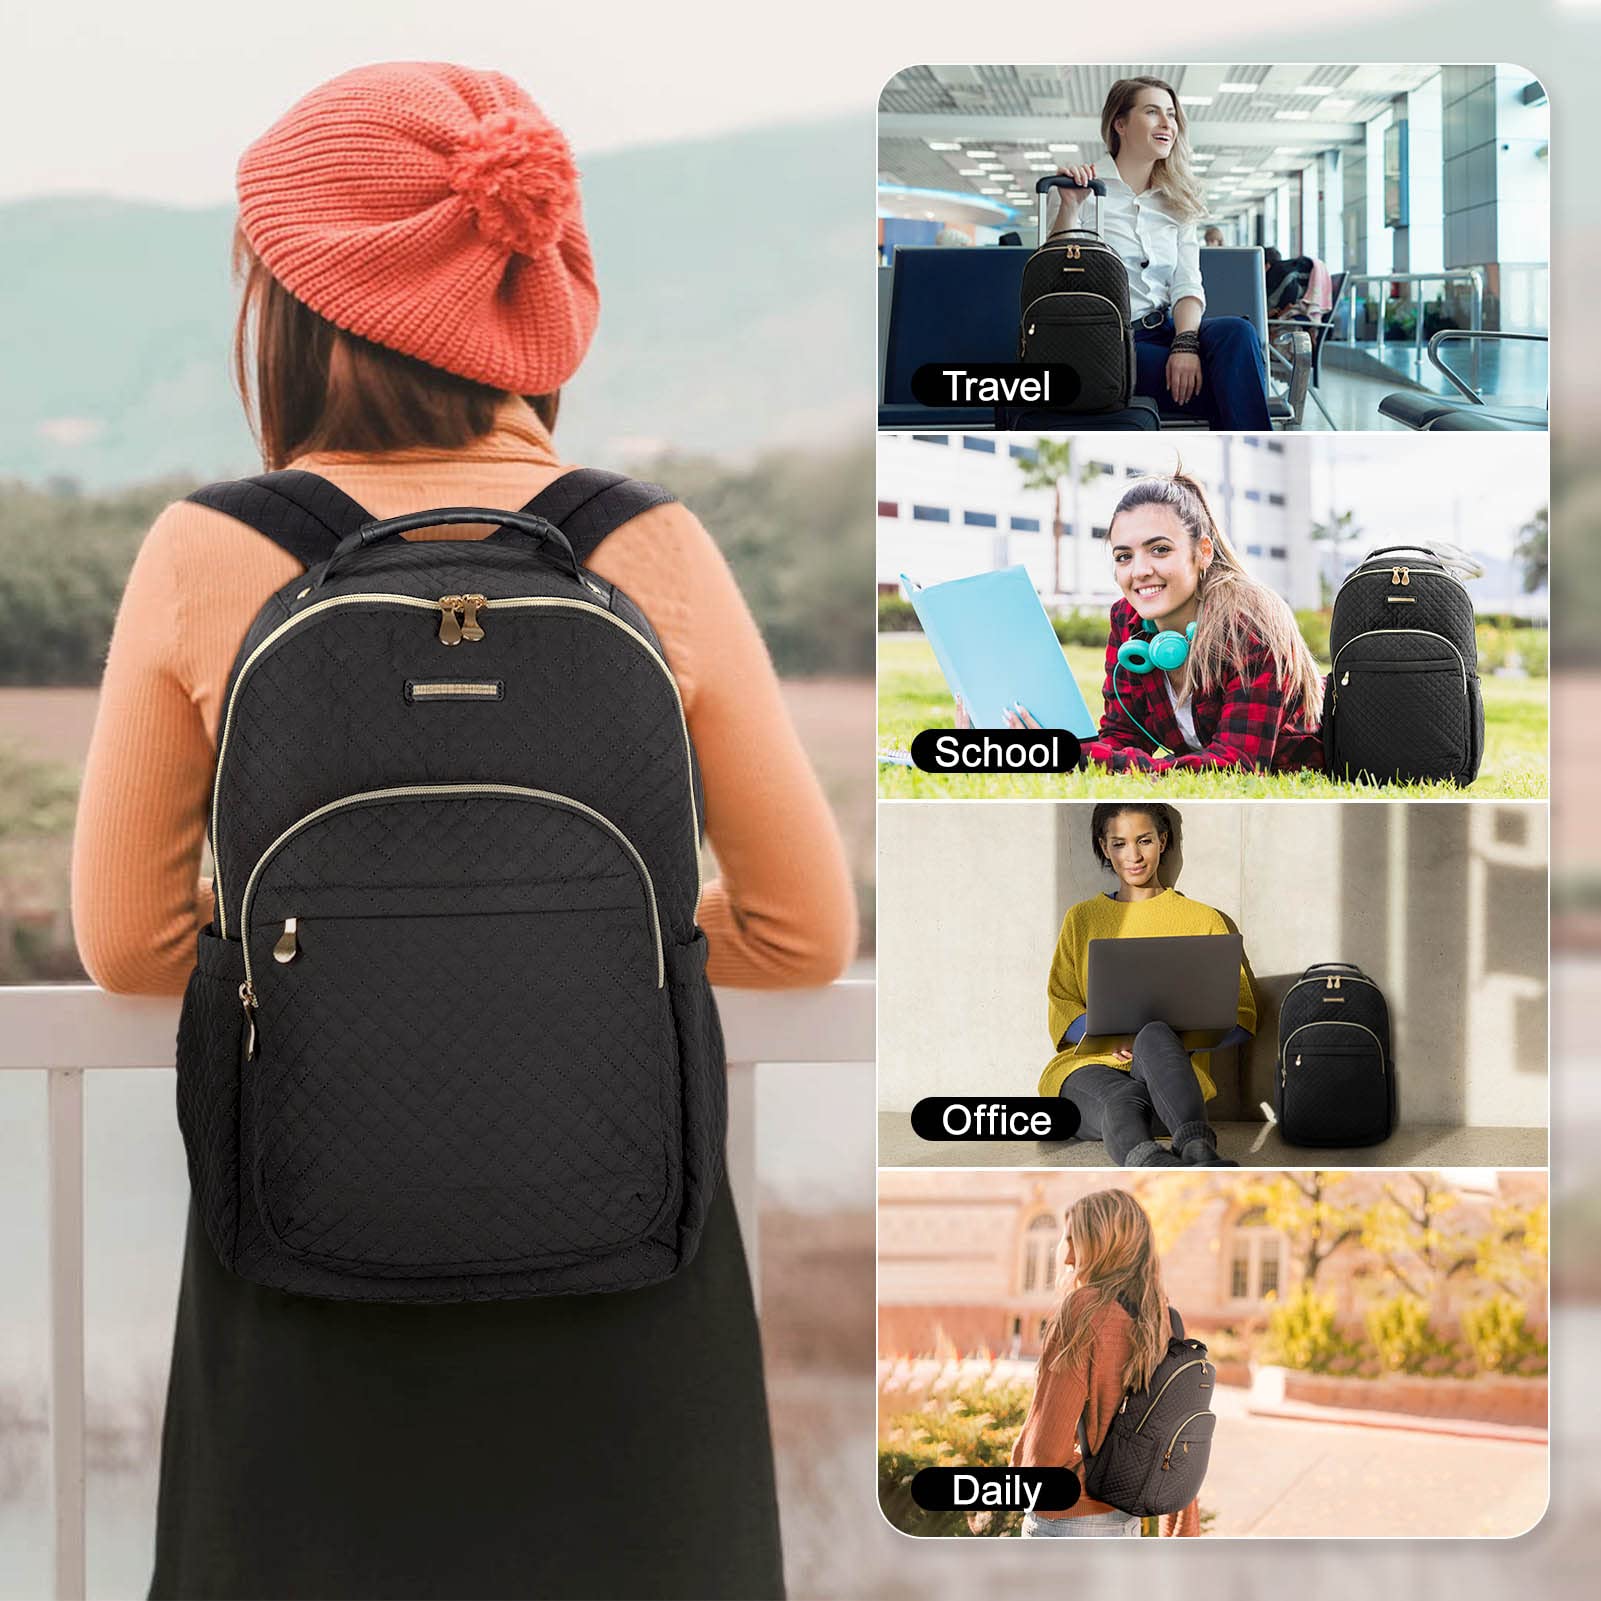 LIGHT FLIGHT Travel Laptop Backpack Women, 15.6 Inch Anti Theft Laptop Backpack with USB Charging Hole Water Resistant Casual Daypack Computer Backpack for Work, Quilted Black